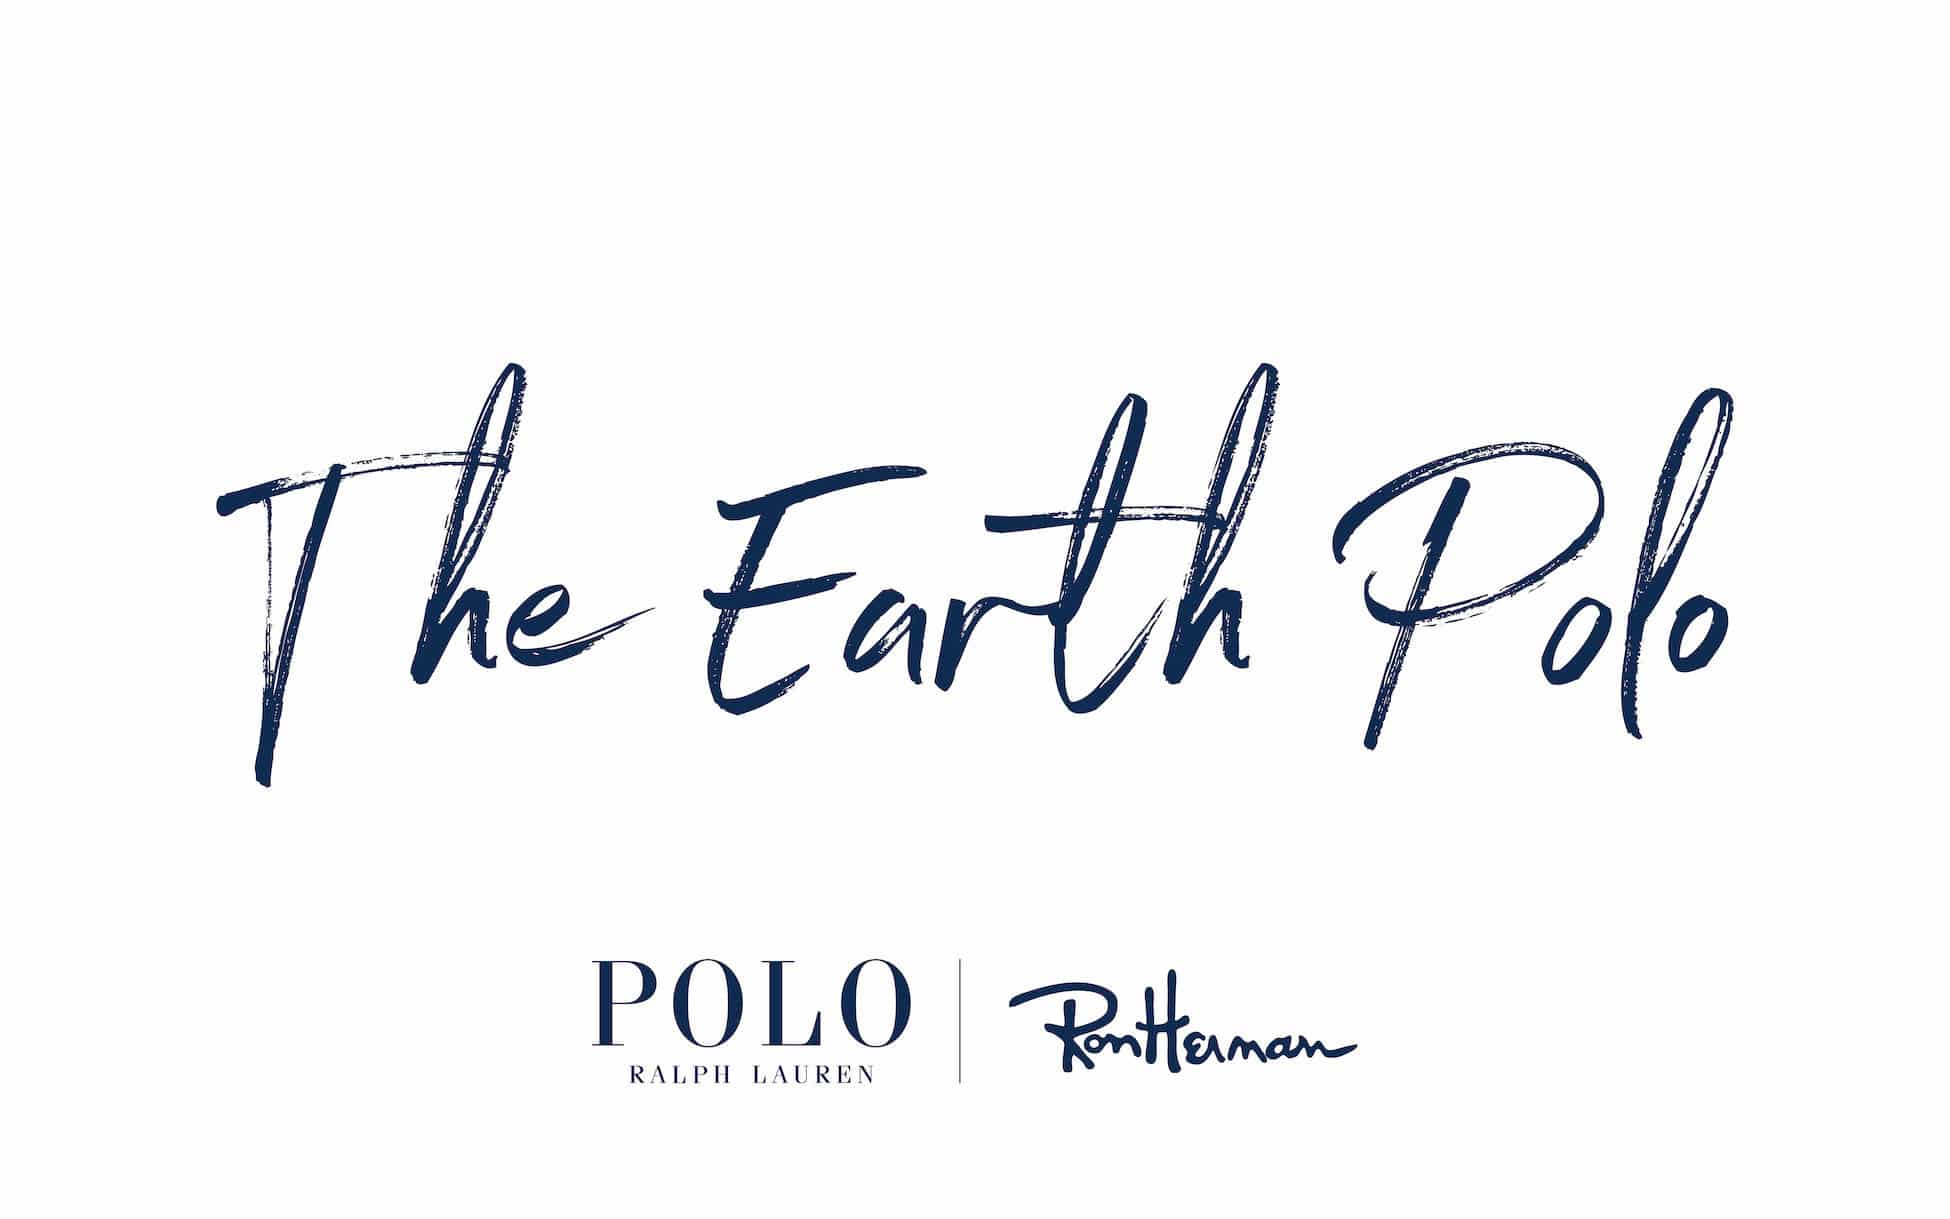 Polo Ralph Lauren for Ron Herman The Earth Polo 5.13(Sat) New